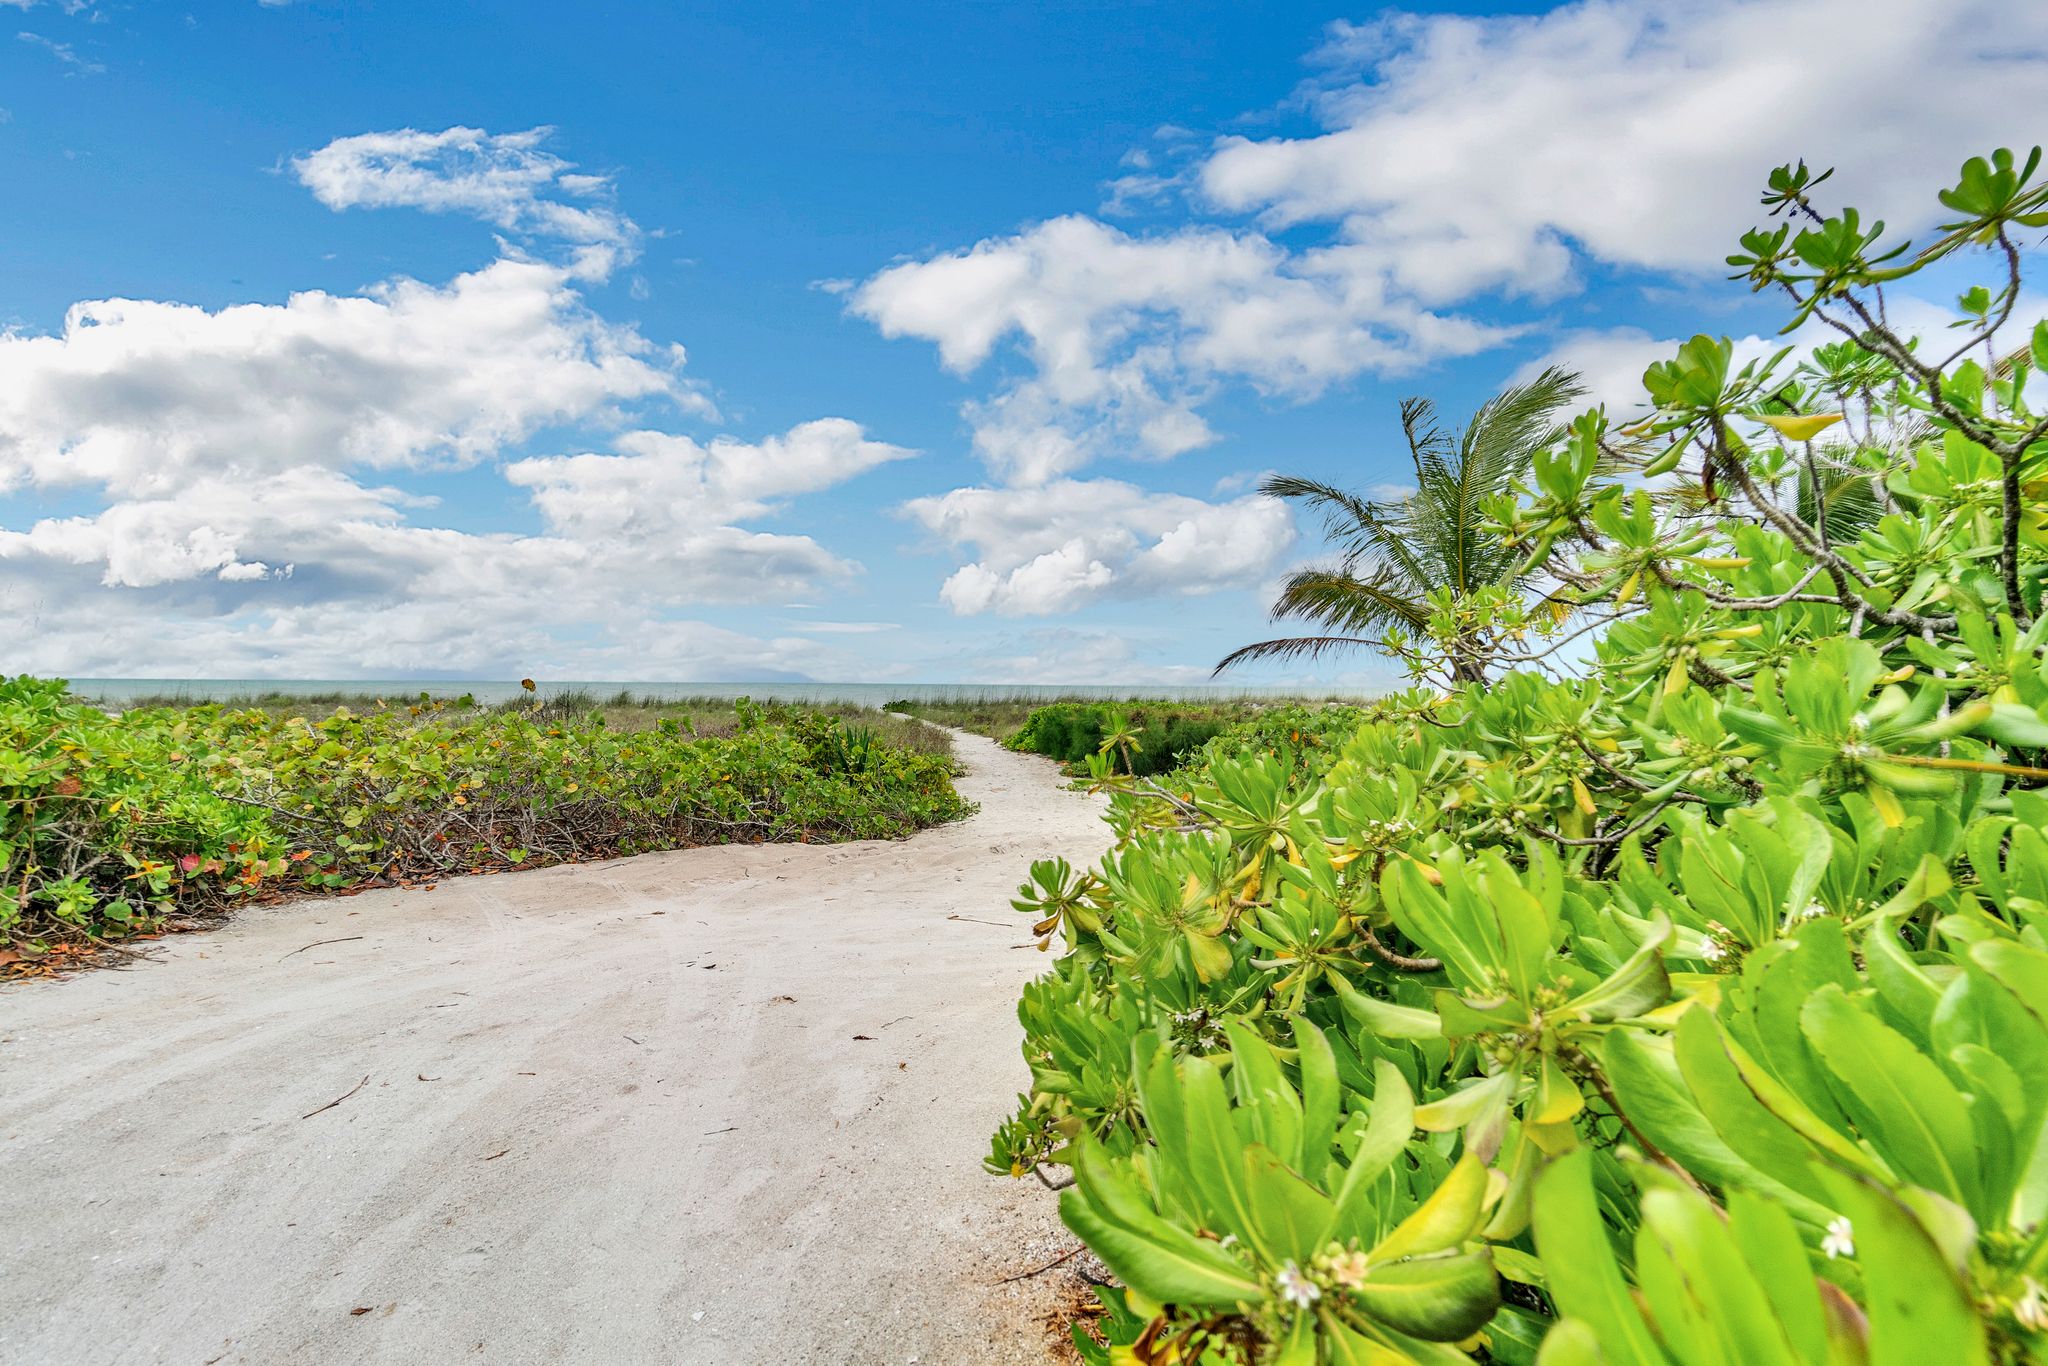 A sandy road near beach flora on a sunny day with clouds in the sky at the Sea Oats Estate in Captiva Island, FL